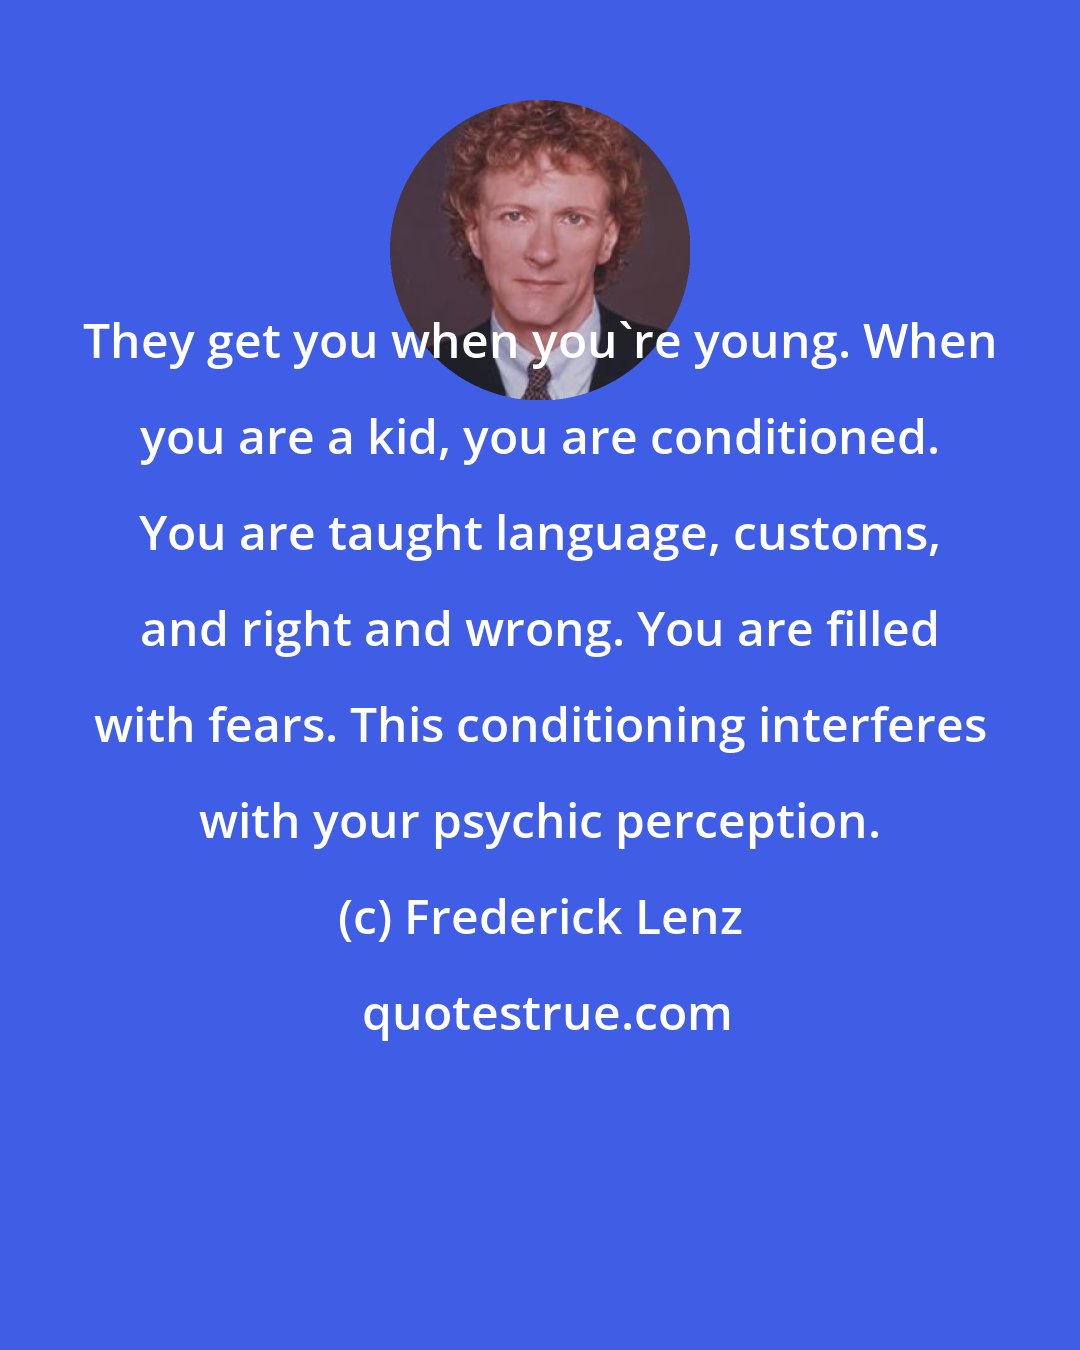 Frederick Lenz: They get you when you're young. When you are a kid, you are conditioned. You are taught language, customs, and right and wrong. You are filled with fears. This conditioning interferes with your psychic perception.